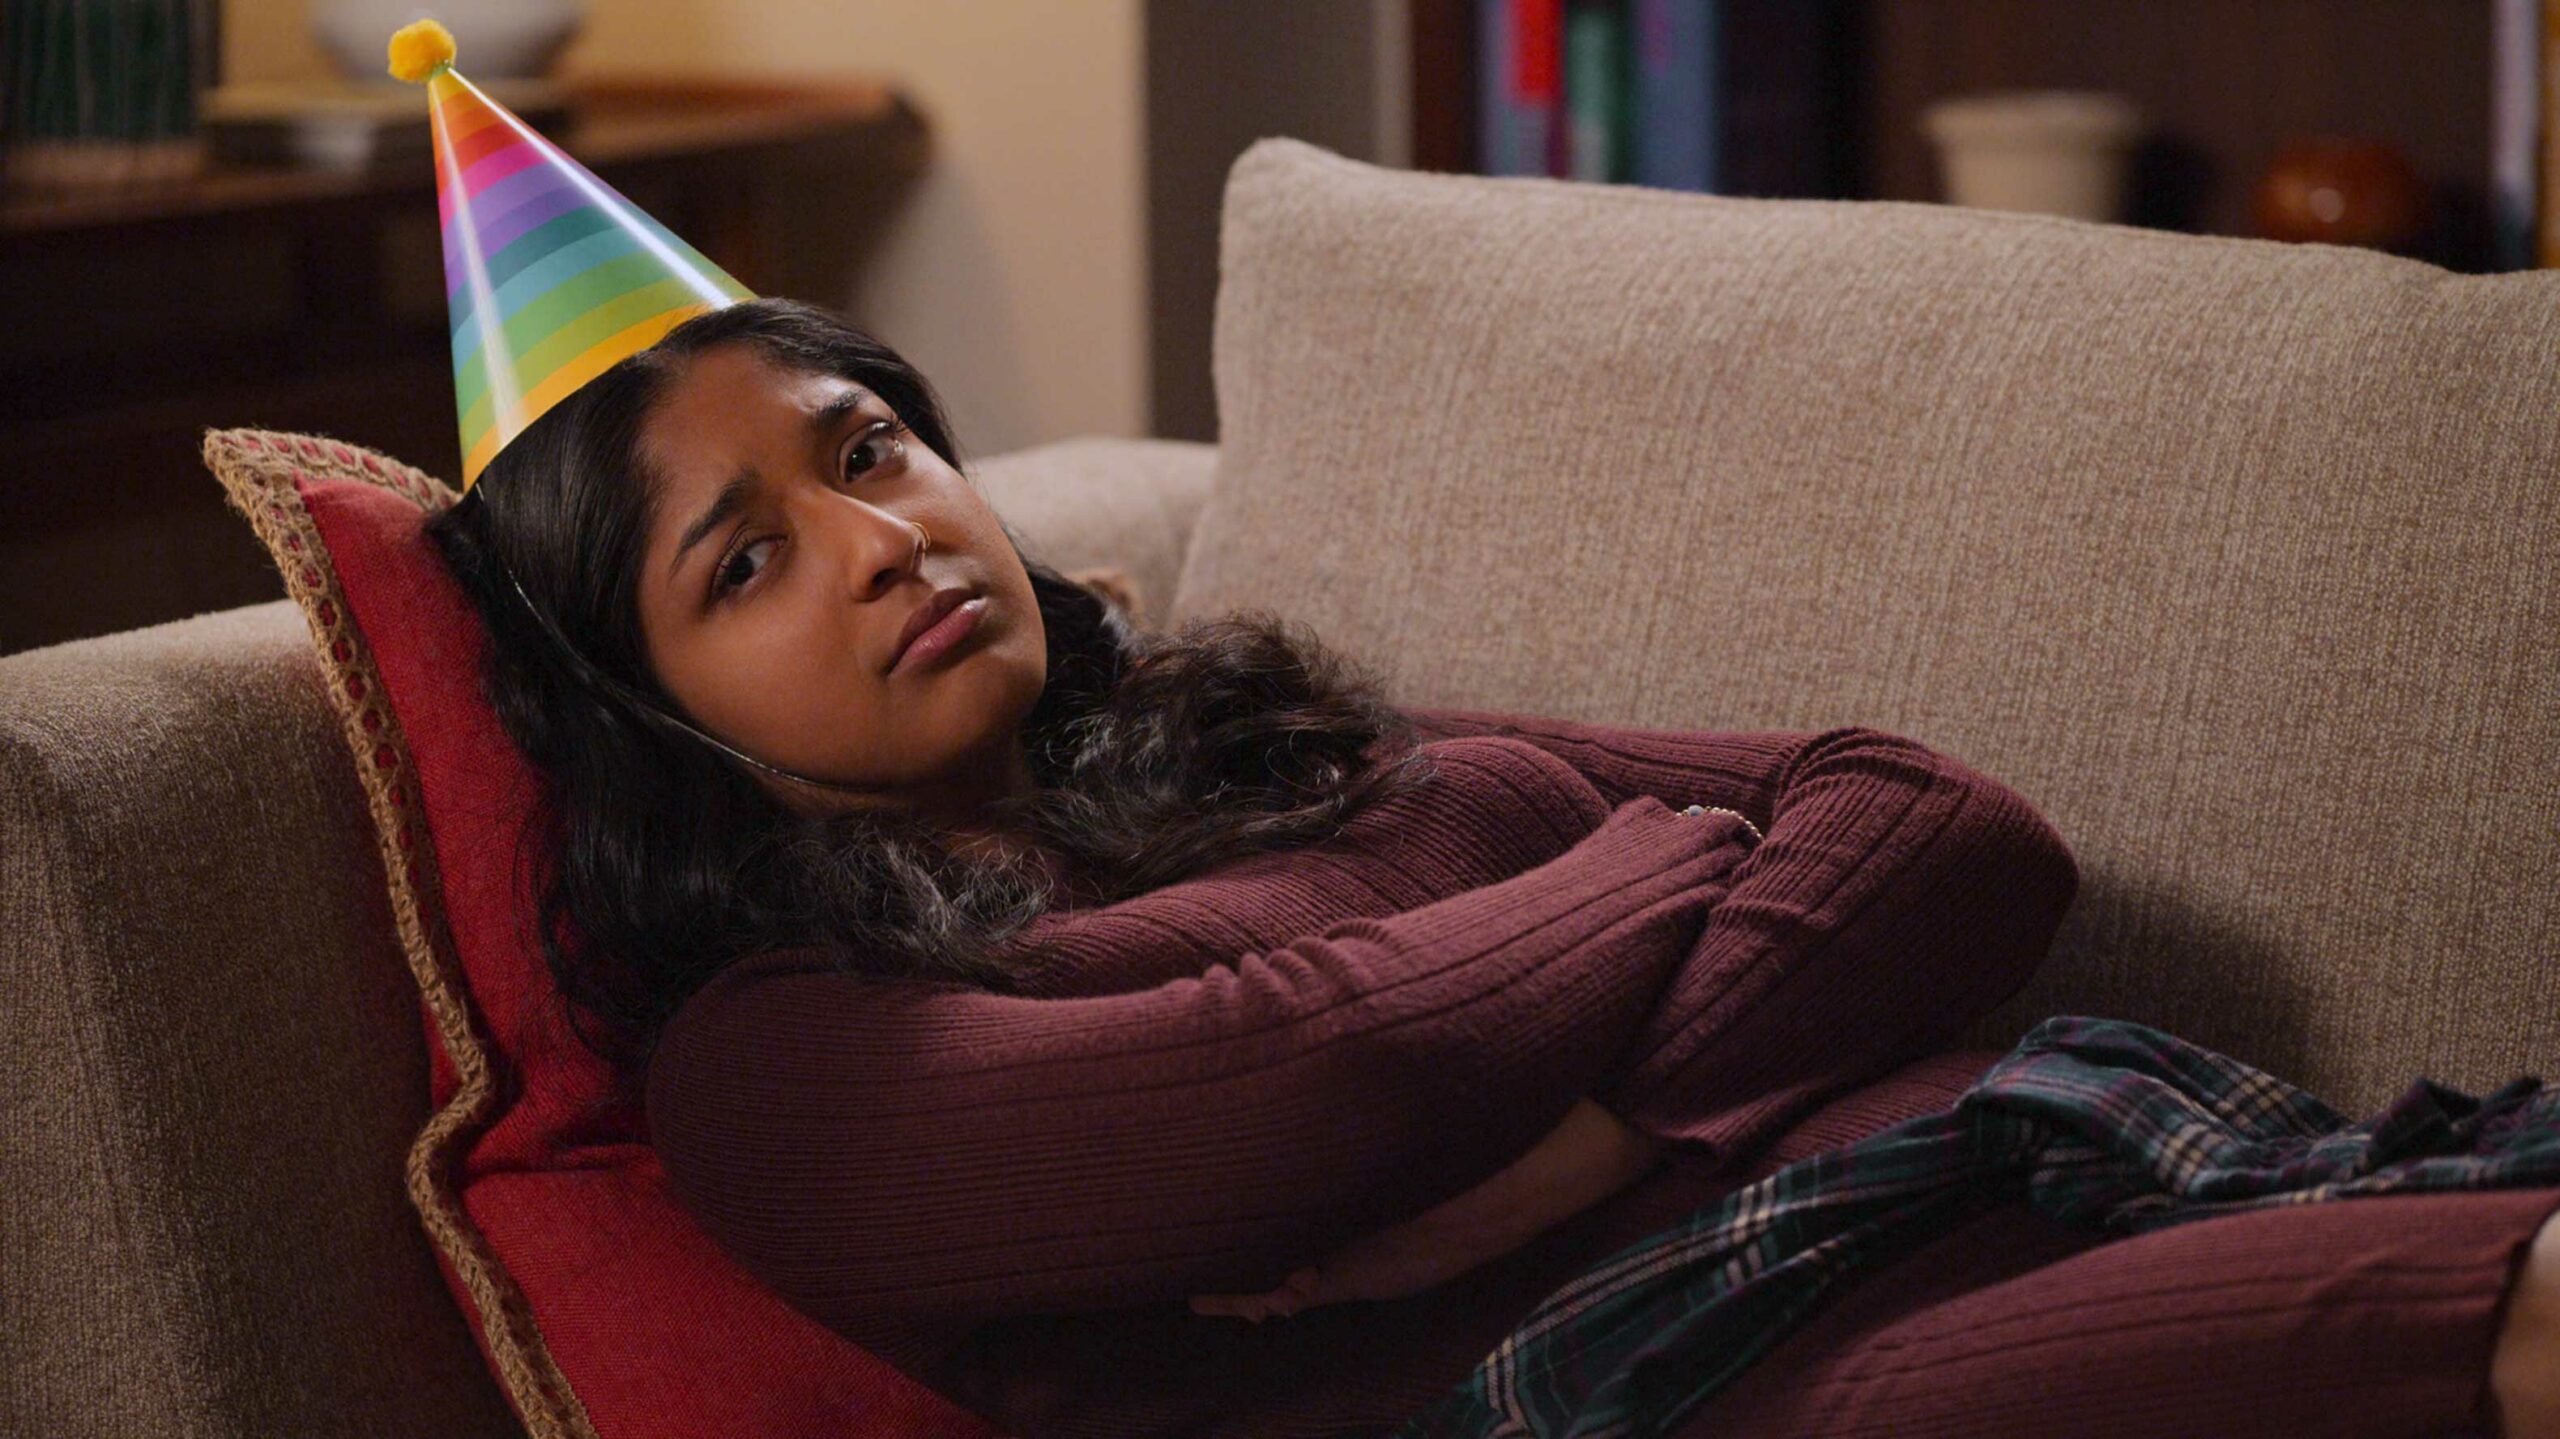 Never Have I Ever Season 3 Devi frowning on couch with birthday hat